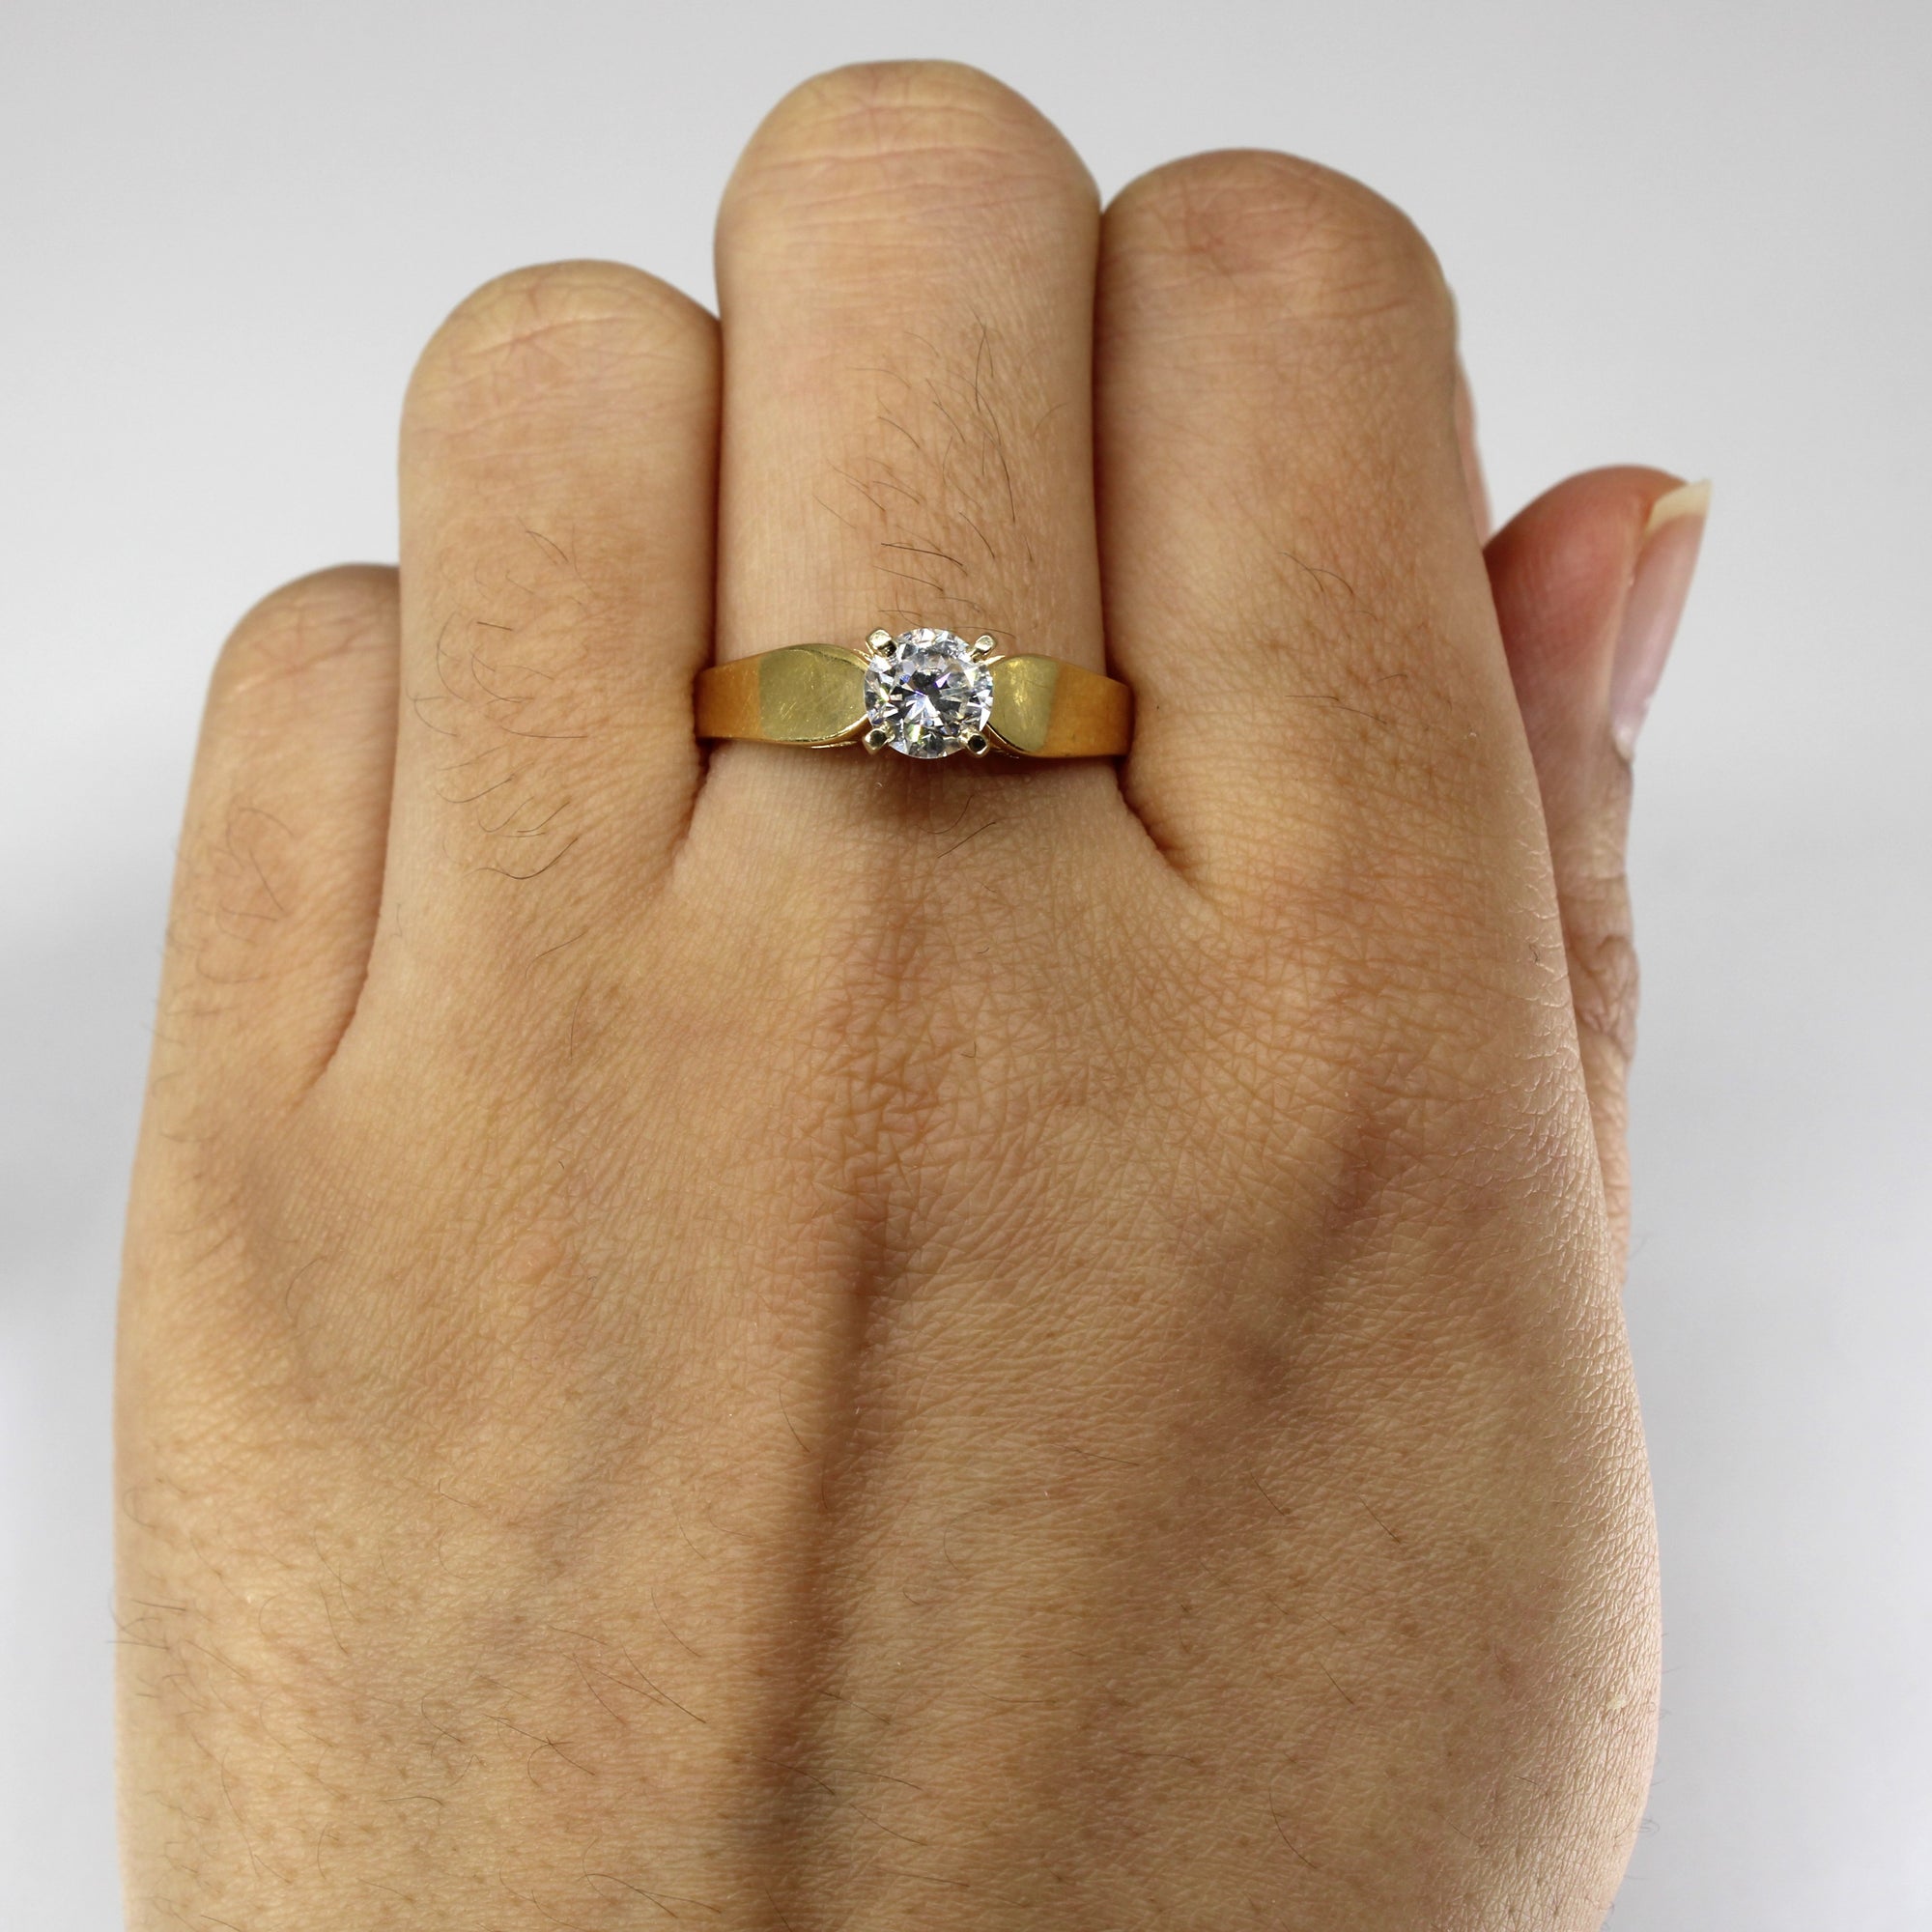 Offset Solitaire Diamond Yellow Gold Ring | 0.80ct | SZ 9.25 |